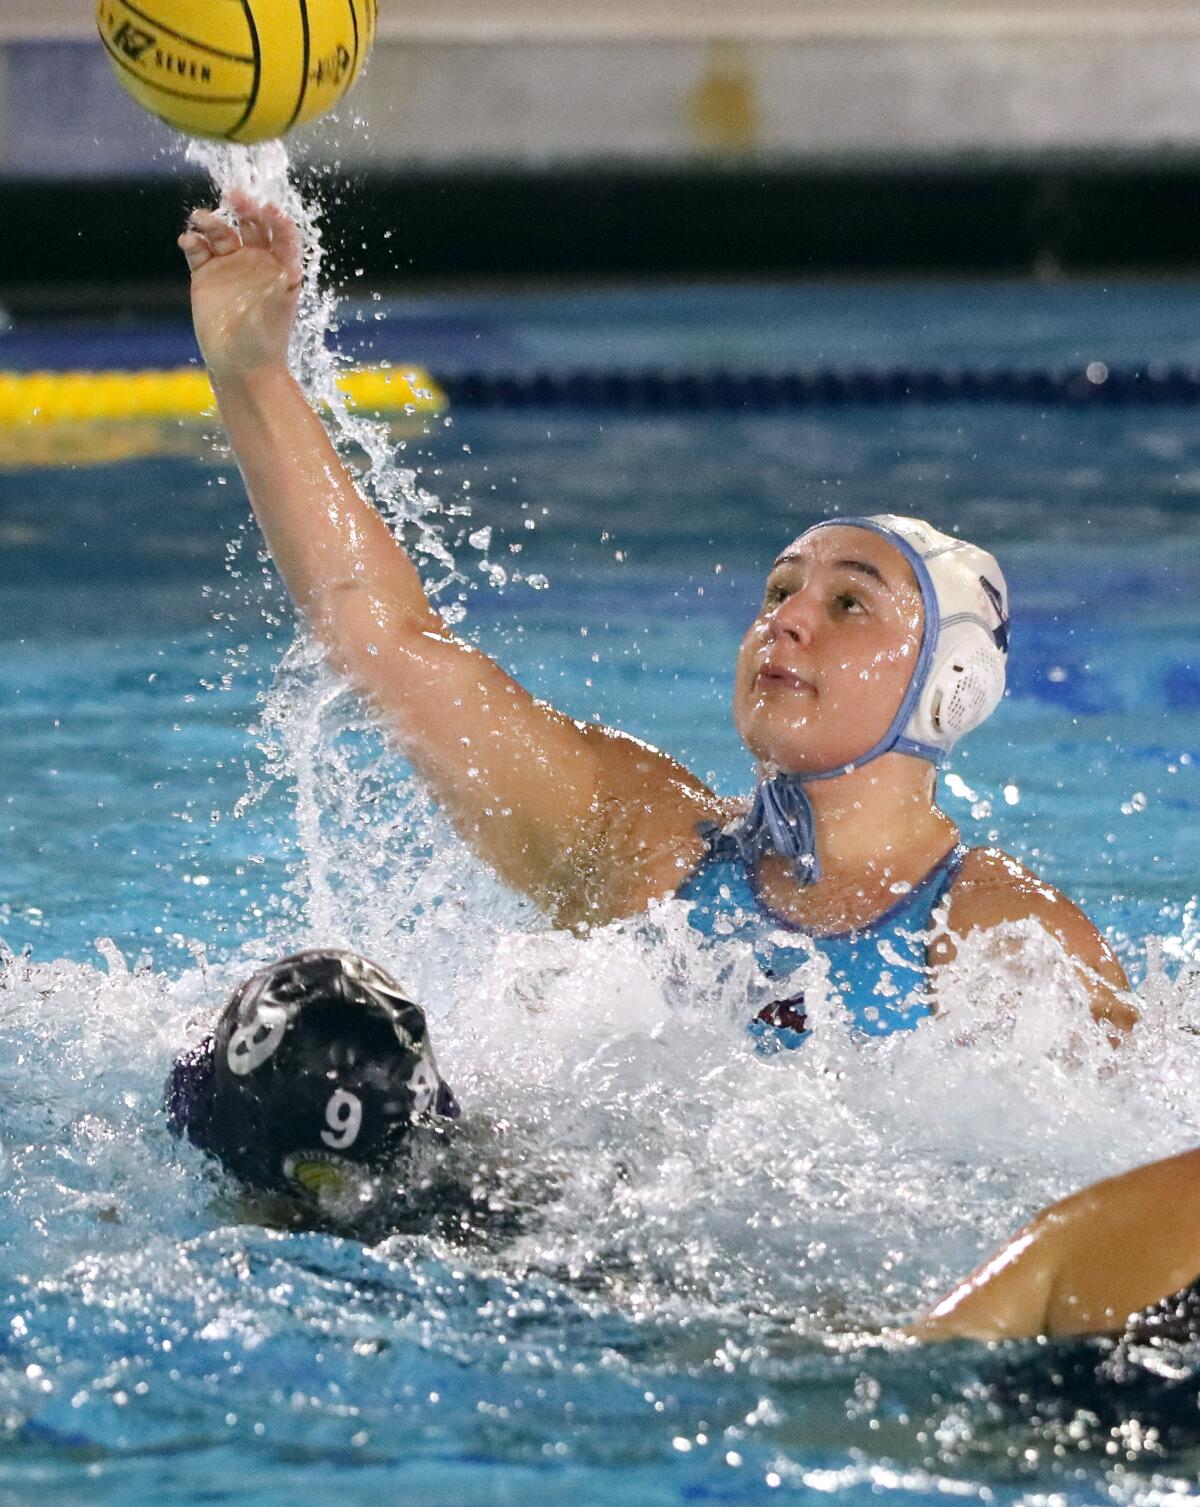 Corona del Mar High School's Kaity Greenwald takes a shot on goal in a game vs. Newport Harbor on March 4.